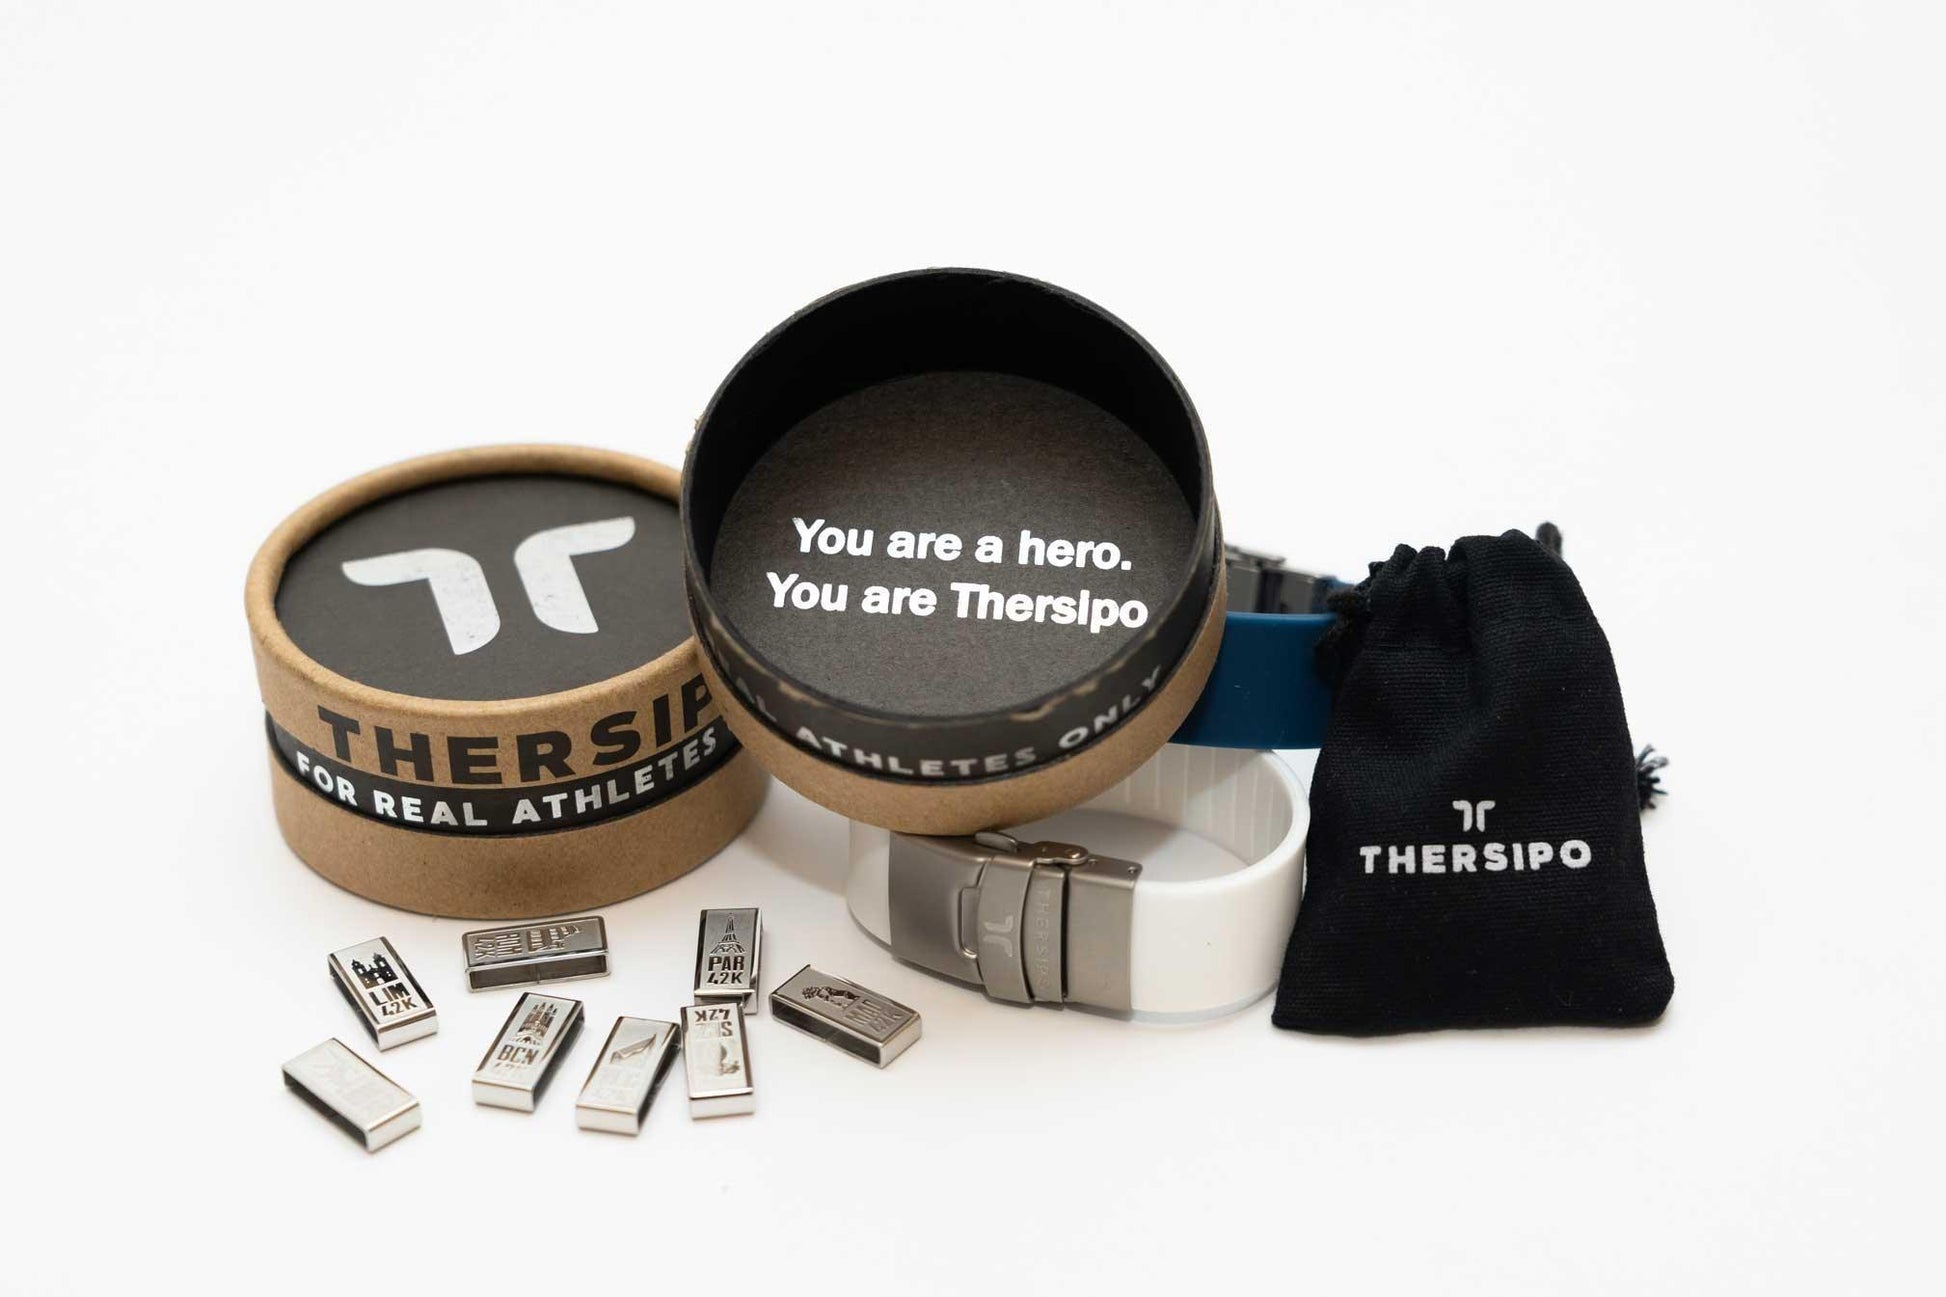 Philadelphia Edition - Thersipo - Medals - 26.2, 26.2mi, 42, 42k, Eastern US, MARATHON, PHILADELPHIA, PHILLY, Runners, Running, spo-default, spo-disabled, spo-notify-me-disabled, US, US East Coast, USA - The perfect gift for marathon runners